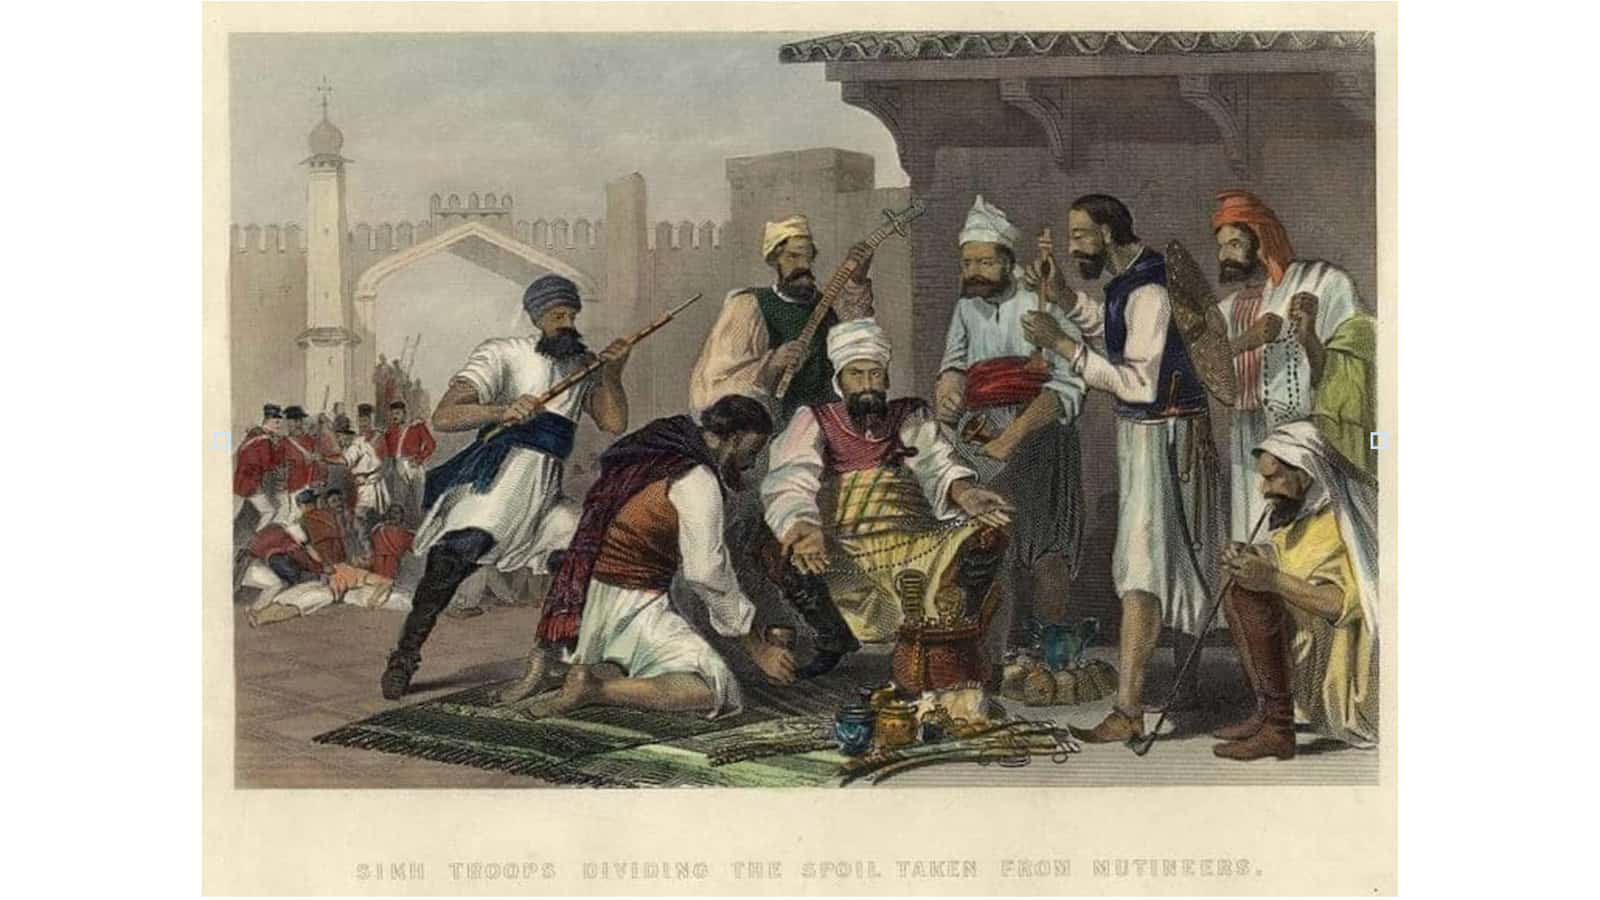 Extensive looting in the siege of Delhi